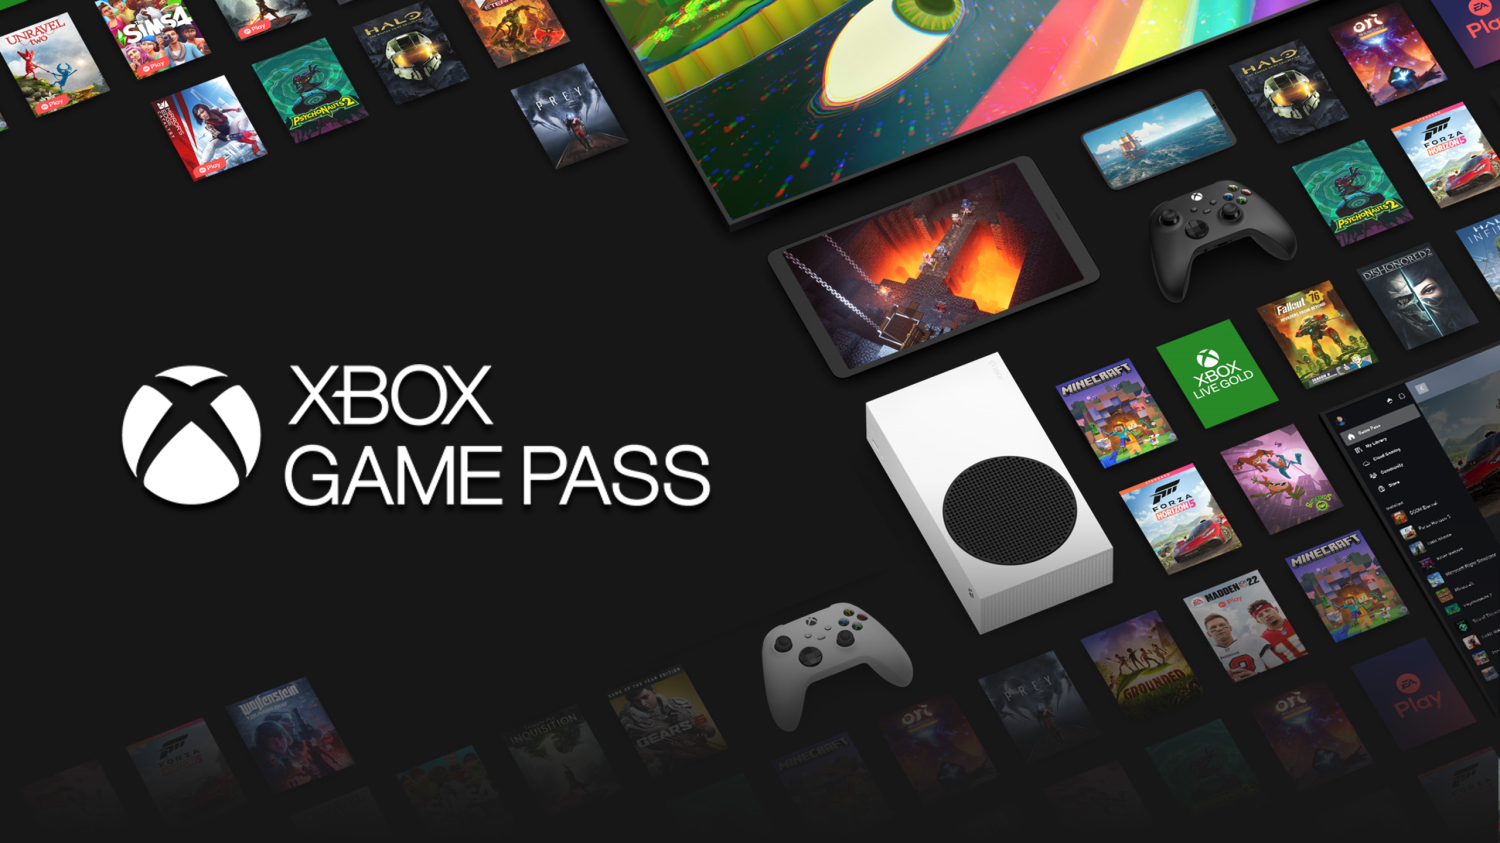 Xbox begins work bringing Activision titles to Game Pass right away